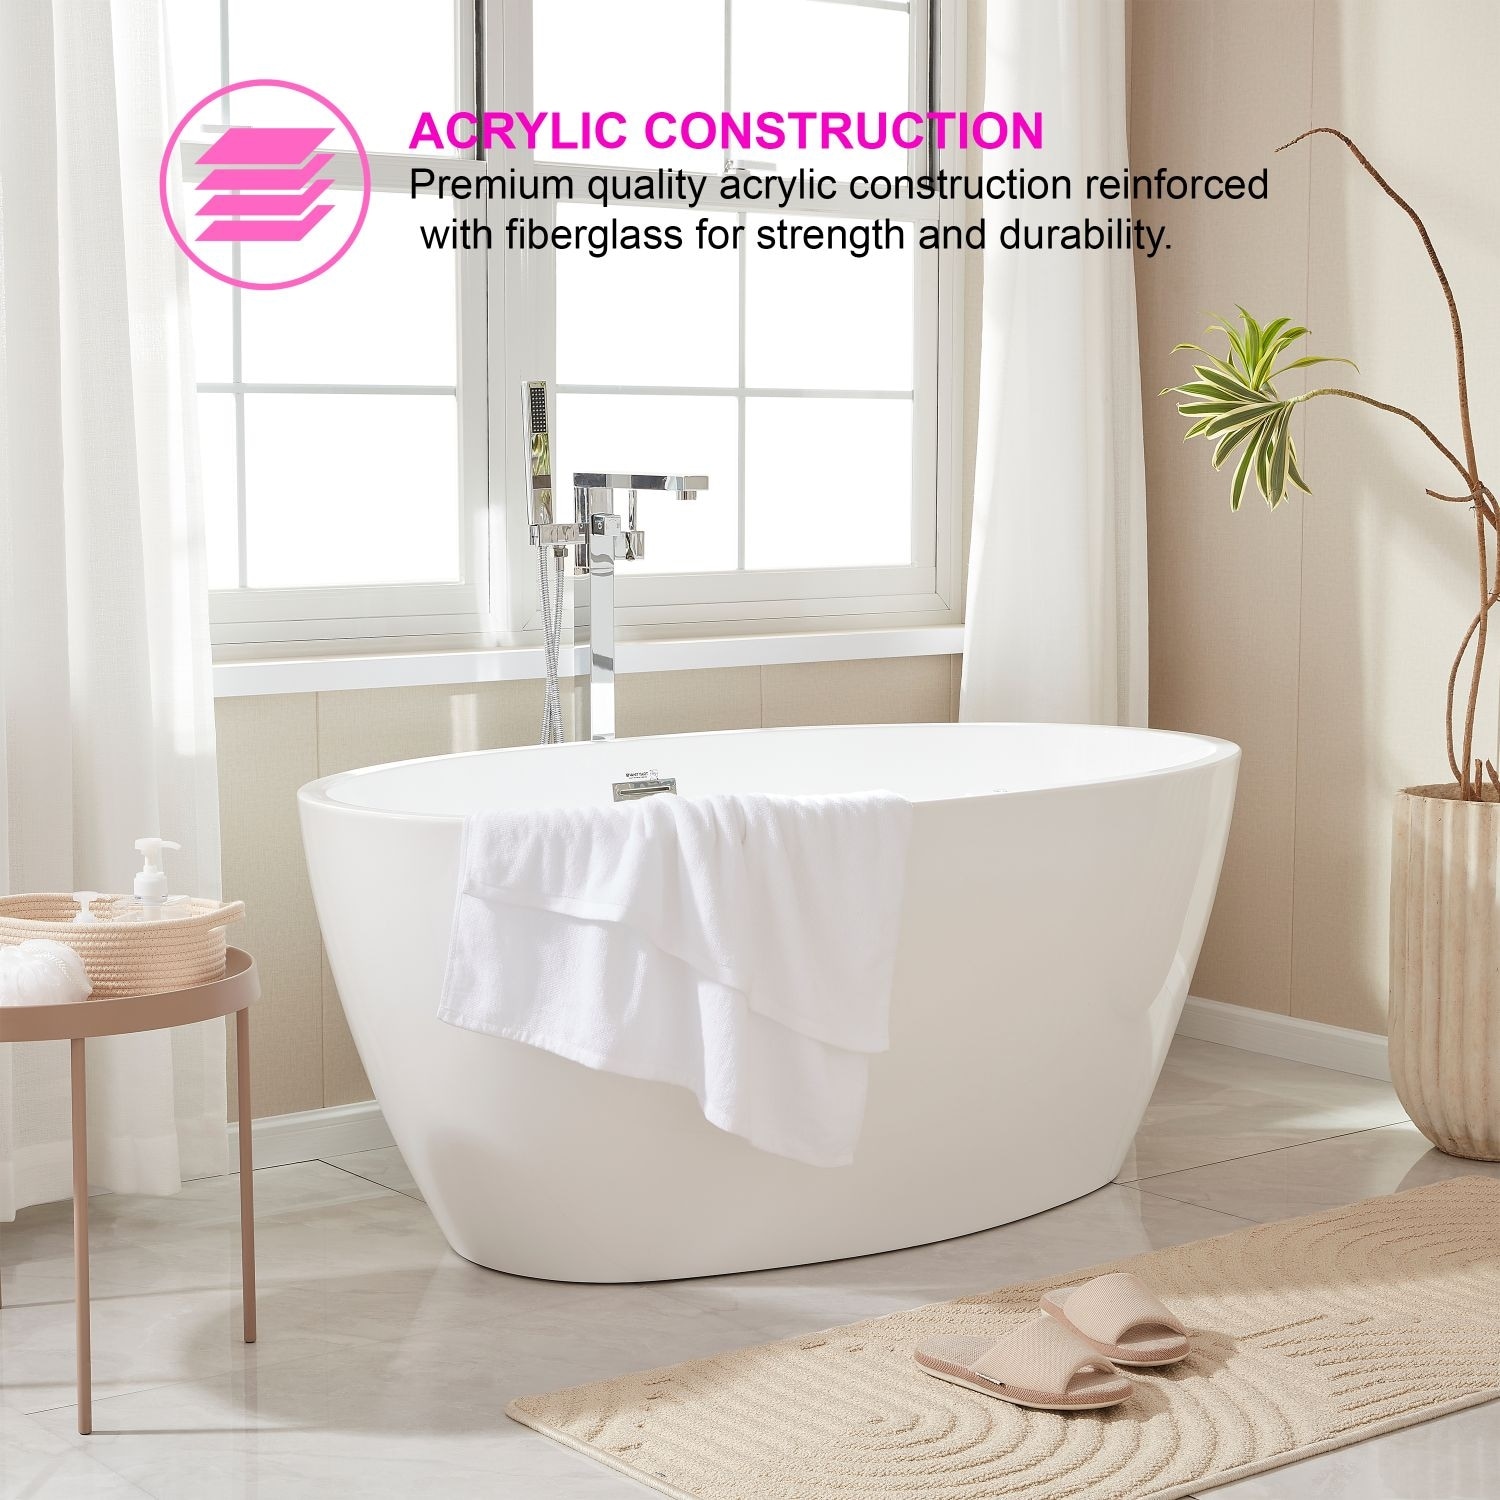 https://ak1.ostkcdn.com/images/products/is/images/direct/2e06edeb1428e71d8e32ab99f9dd143a805e0ac3/Vanity-Art-55%22-Freestanding-Acrylic-Soaking-Bathtub-with-Slotted-Overflow-%26-Pop-up-Drain-with-Air-Bath-Option-Available.jpg